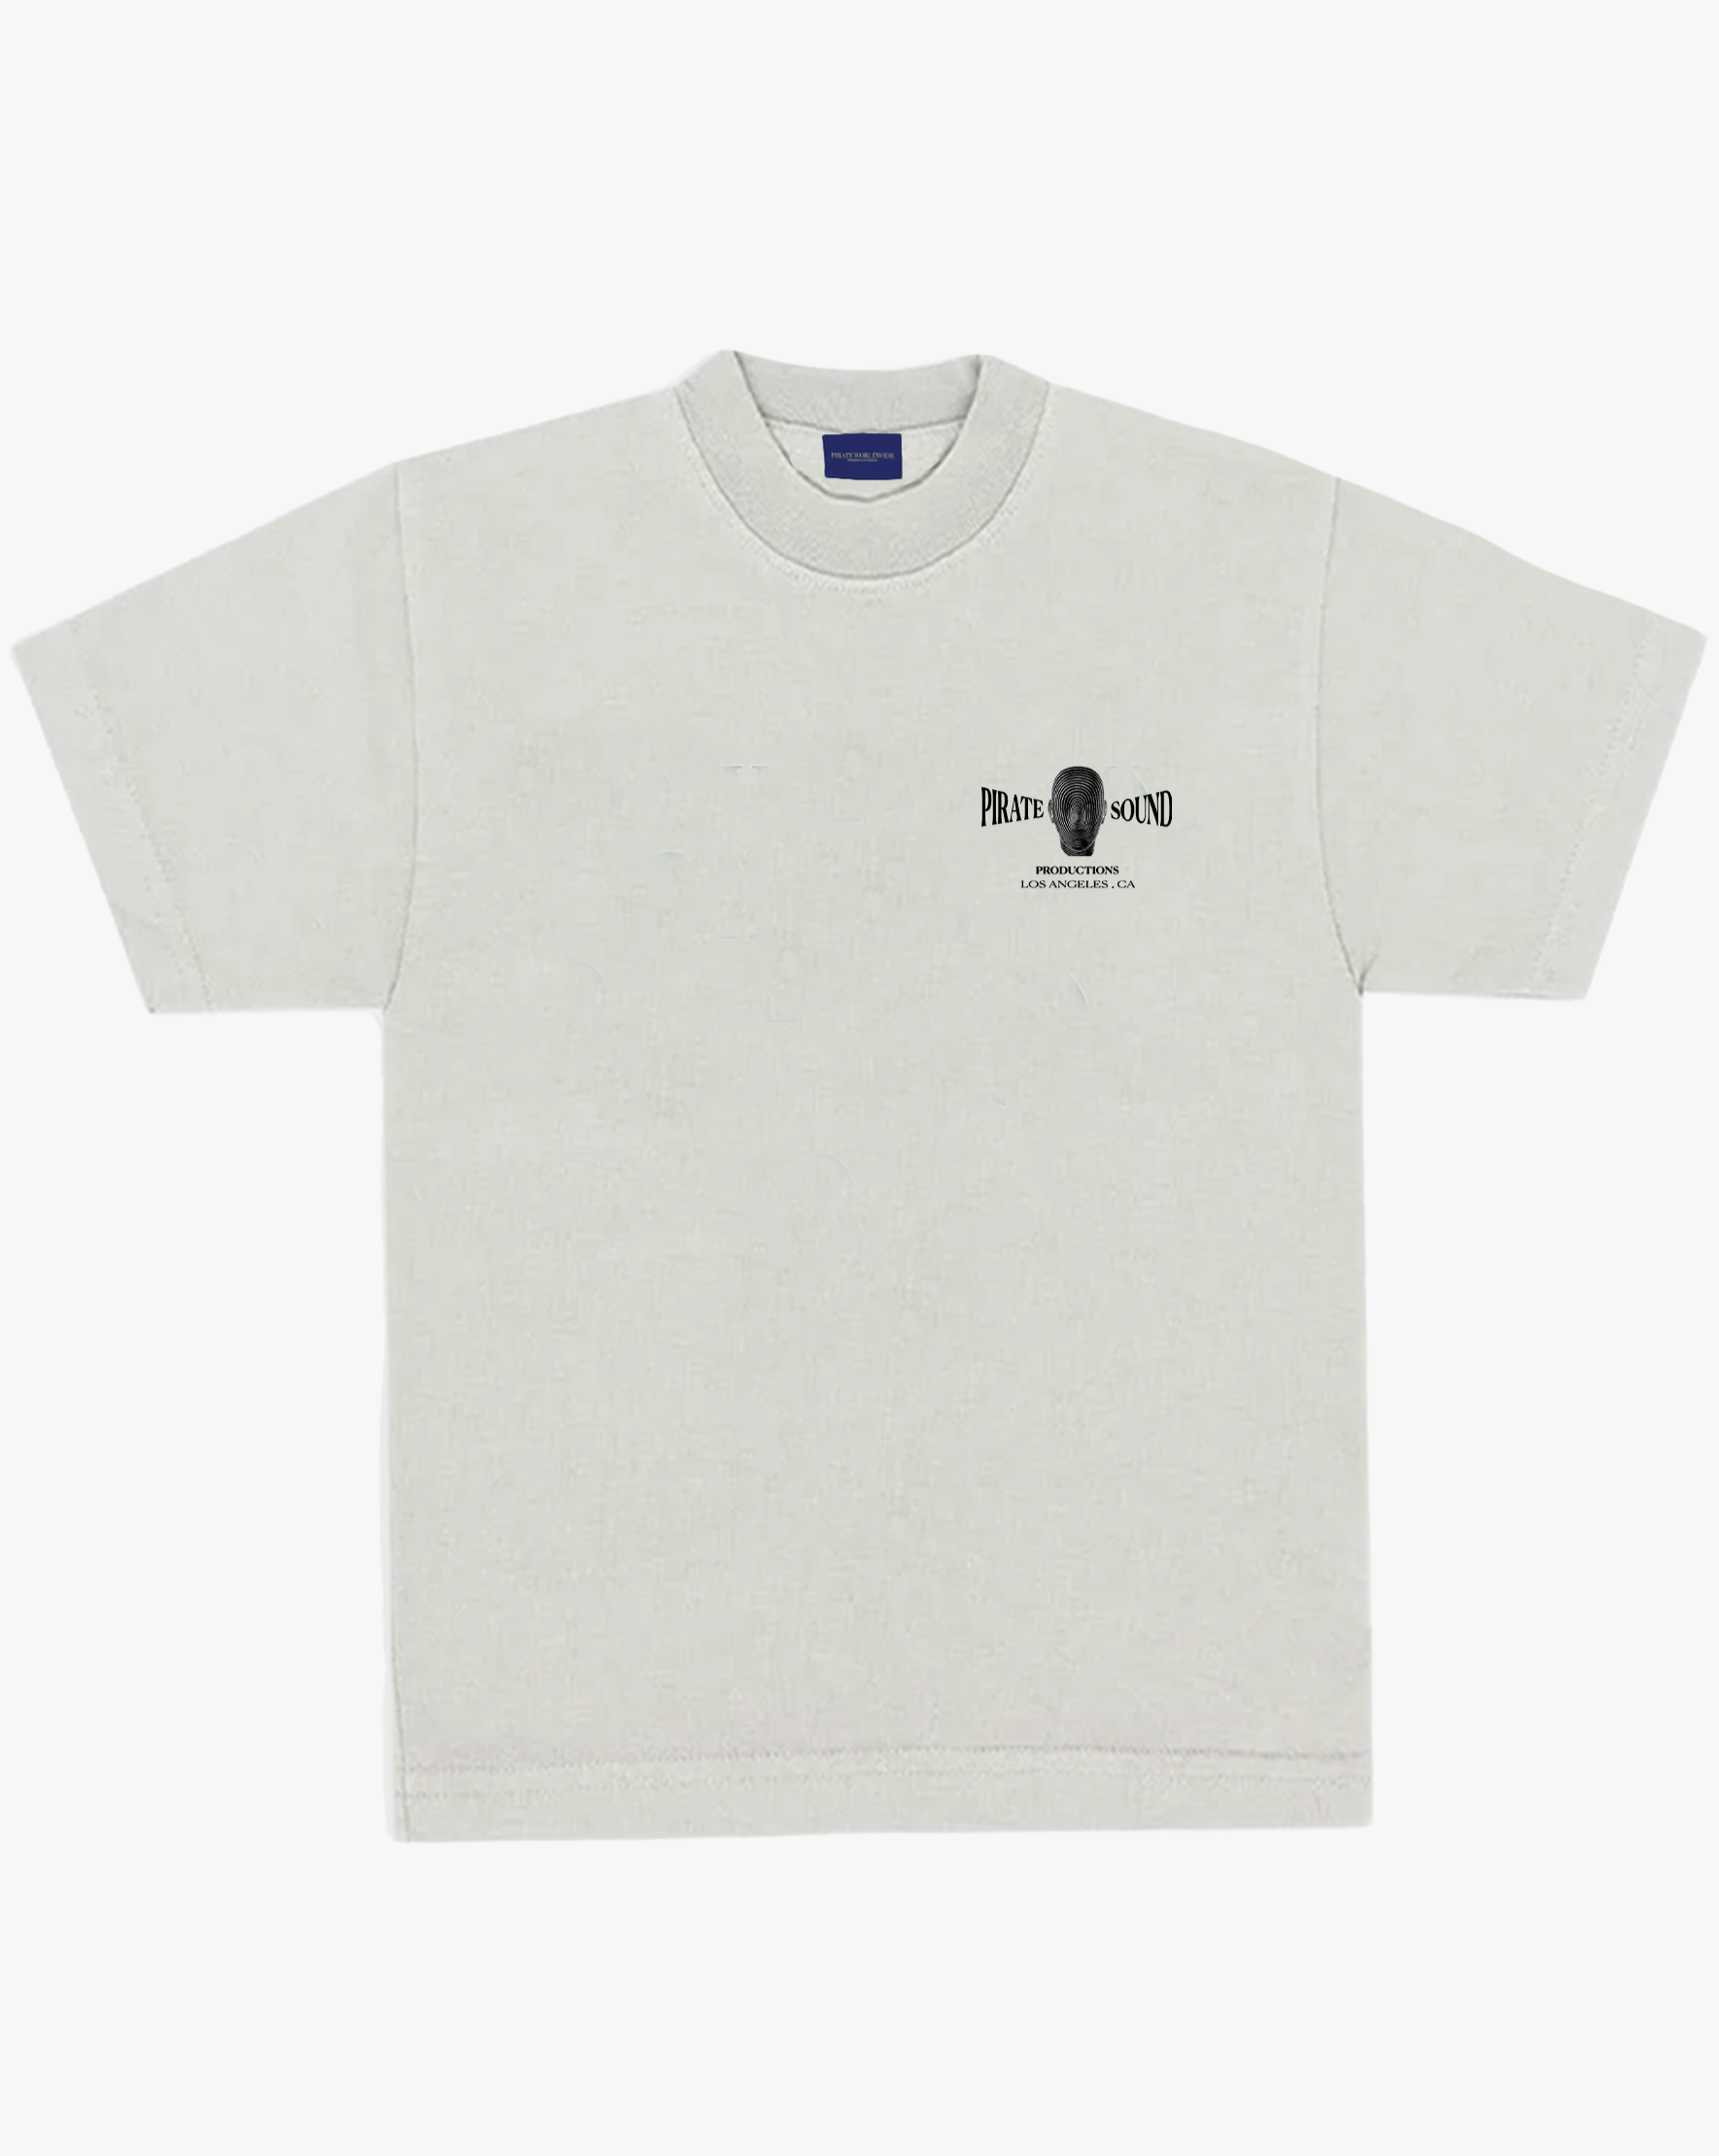 Pirate Sound Productions Tee (Off White .WAV Edition)